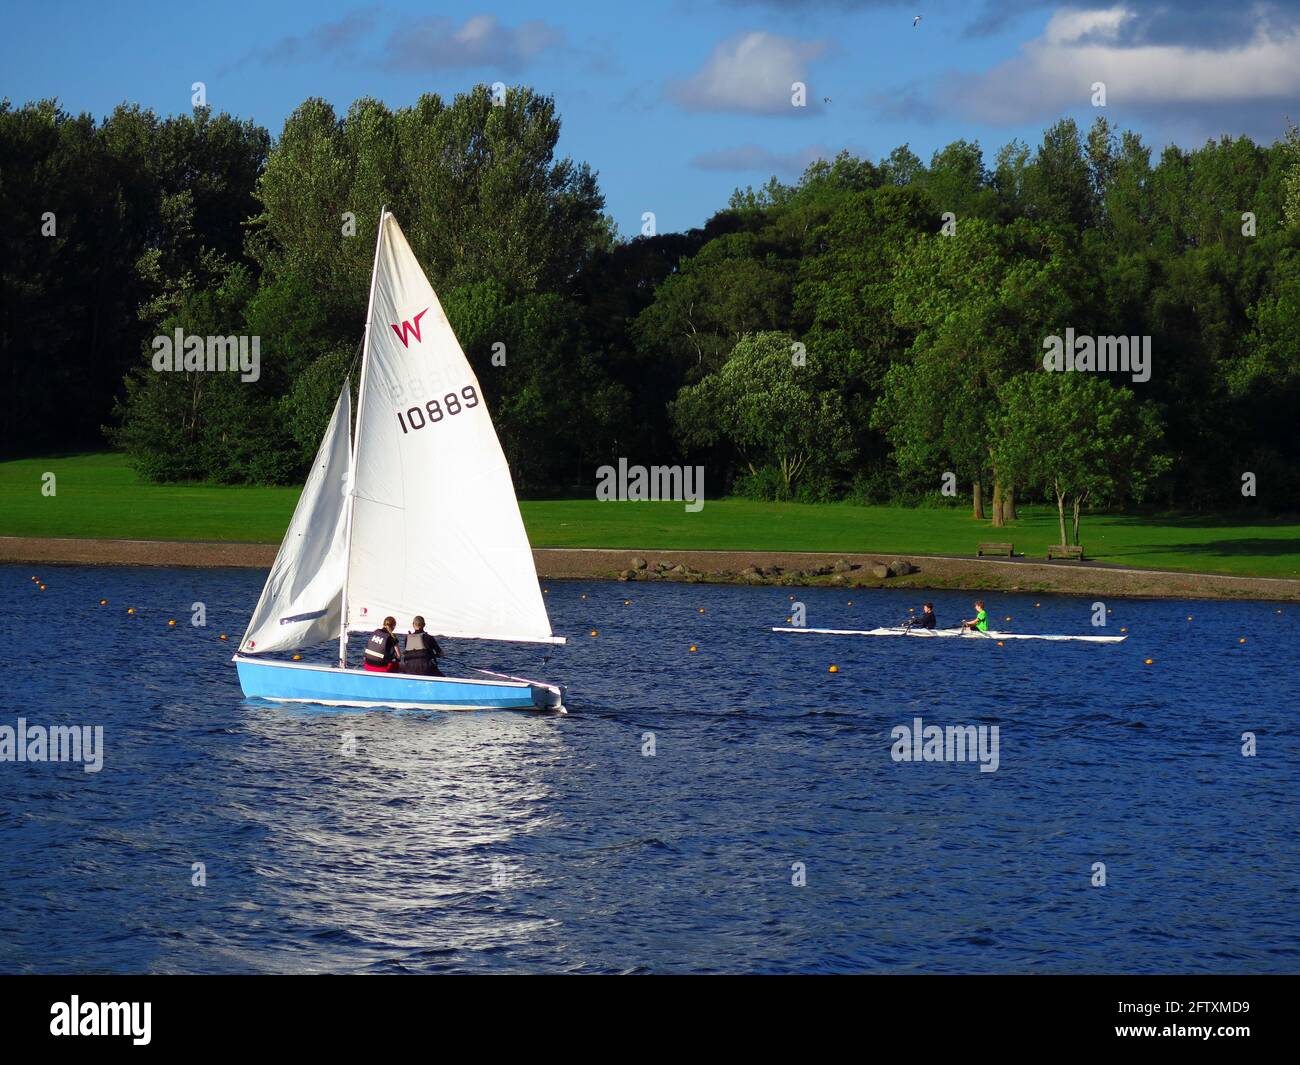 Dinghy and double scull on Strathclyde Loch Stock Photo